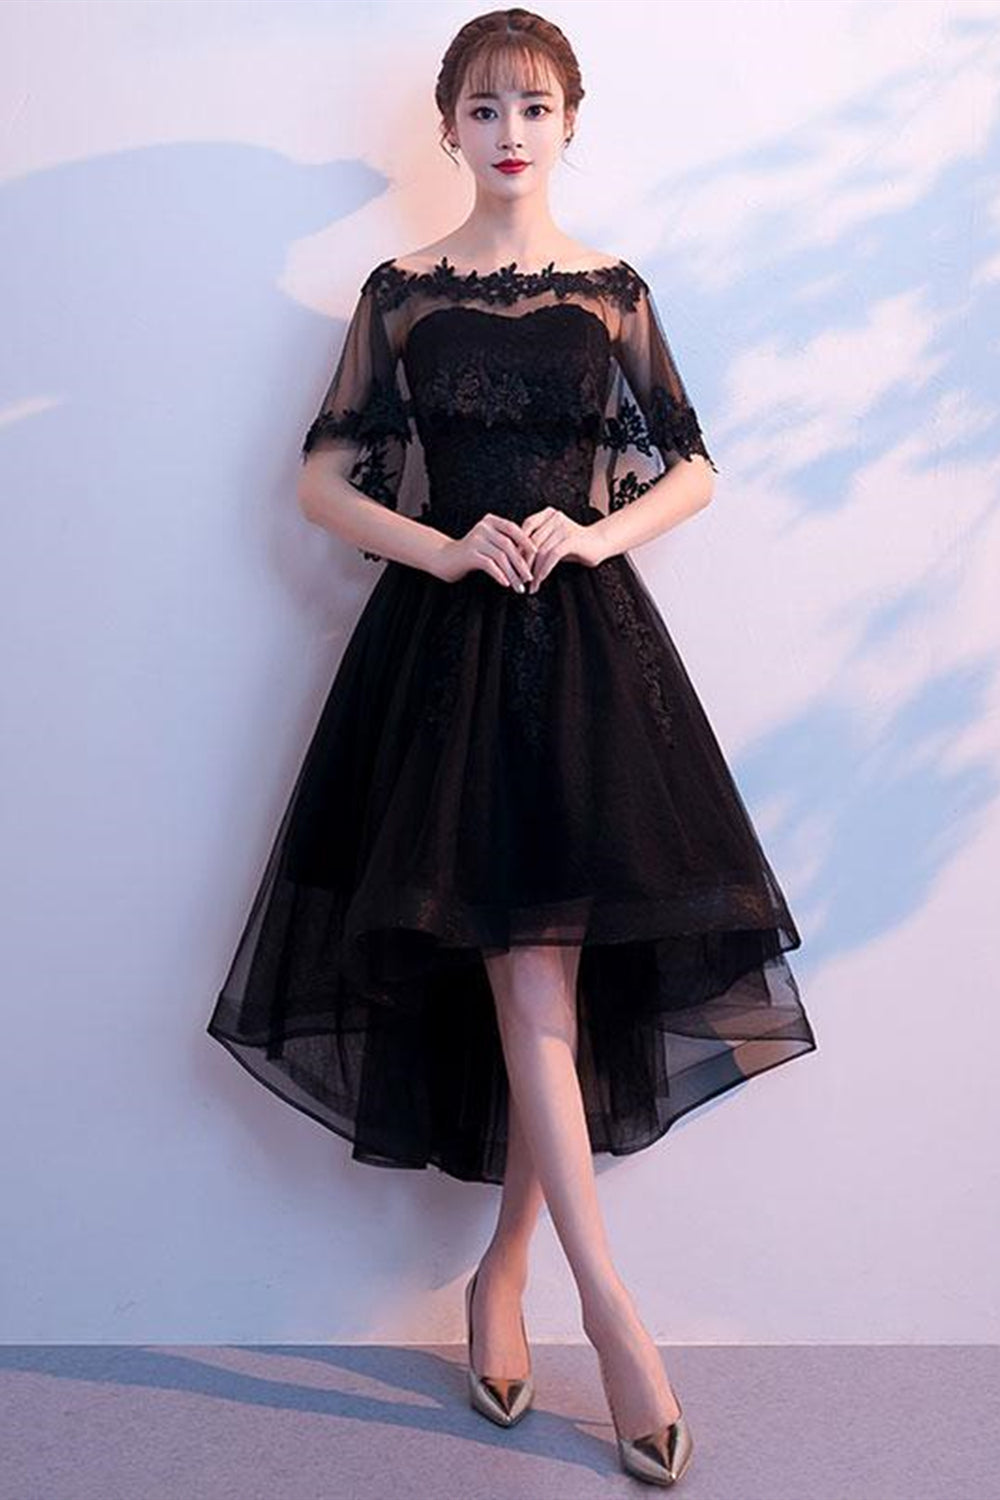 Black Tulle Lace High-Low Party Dress, Cute Short Sleeve Homecoming Dress US 10 / Black